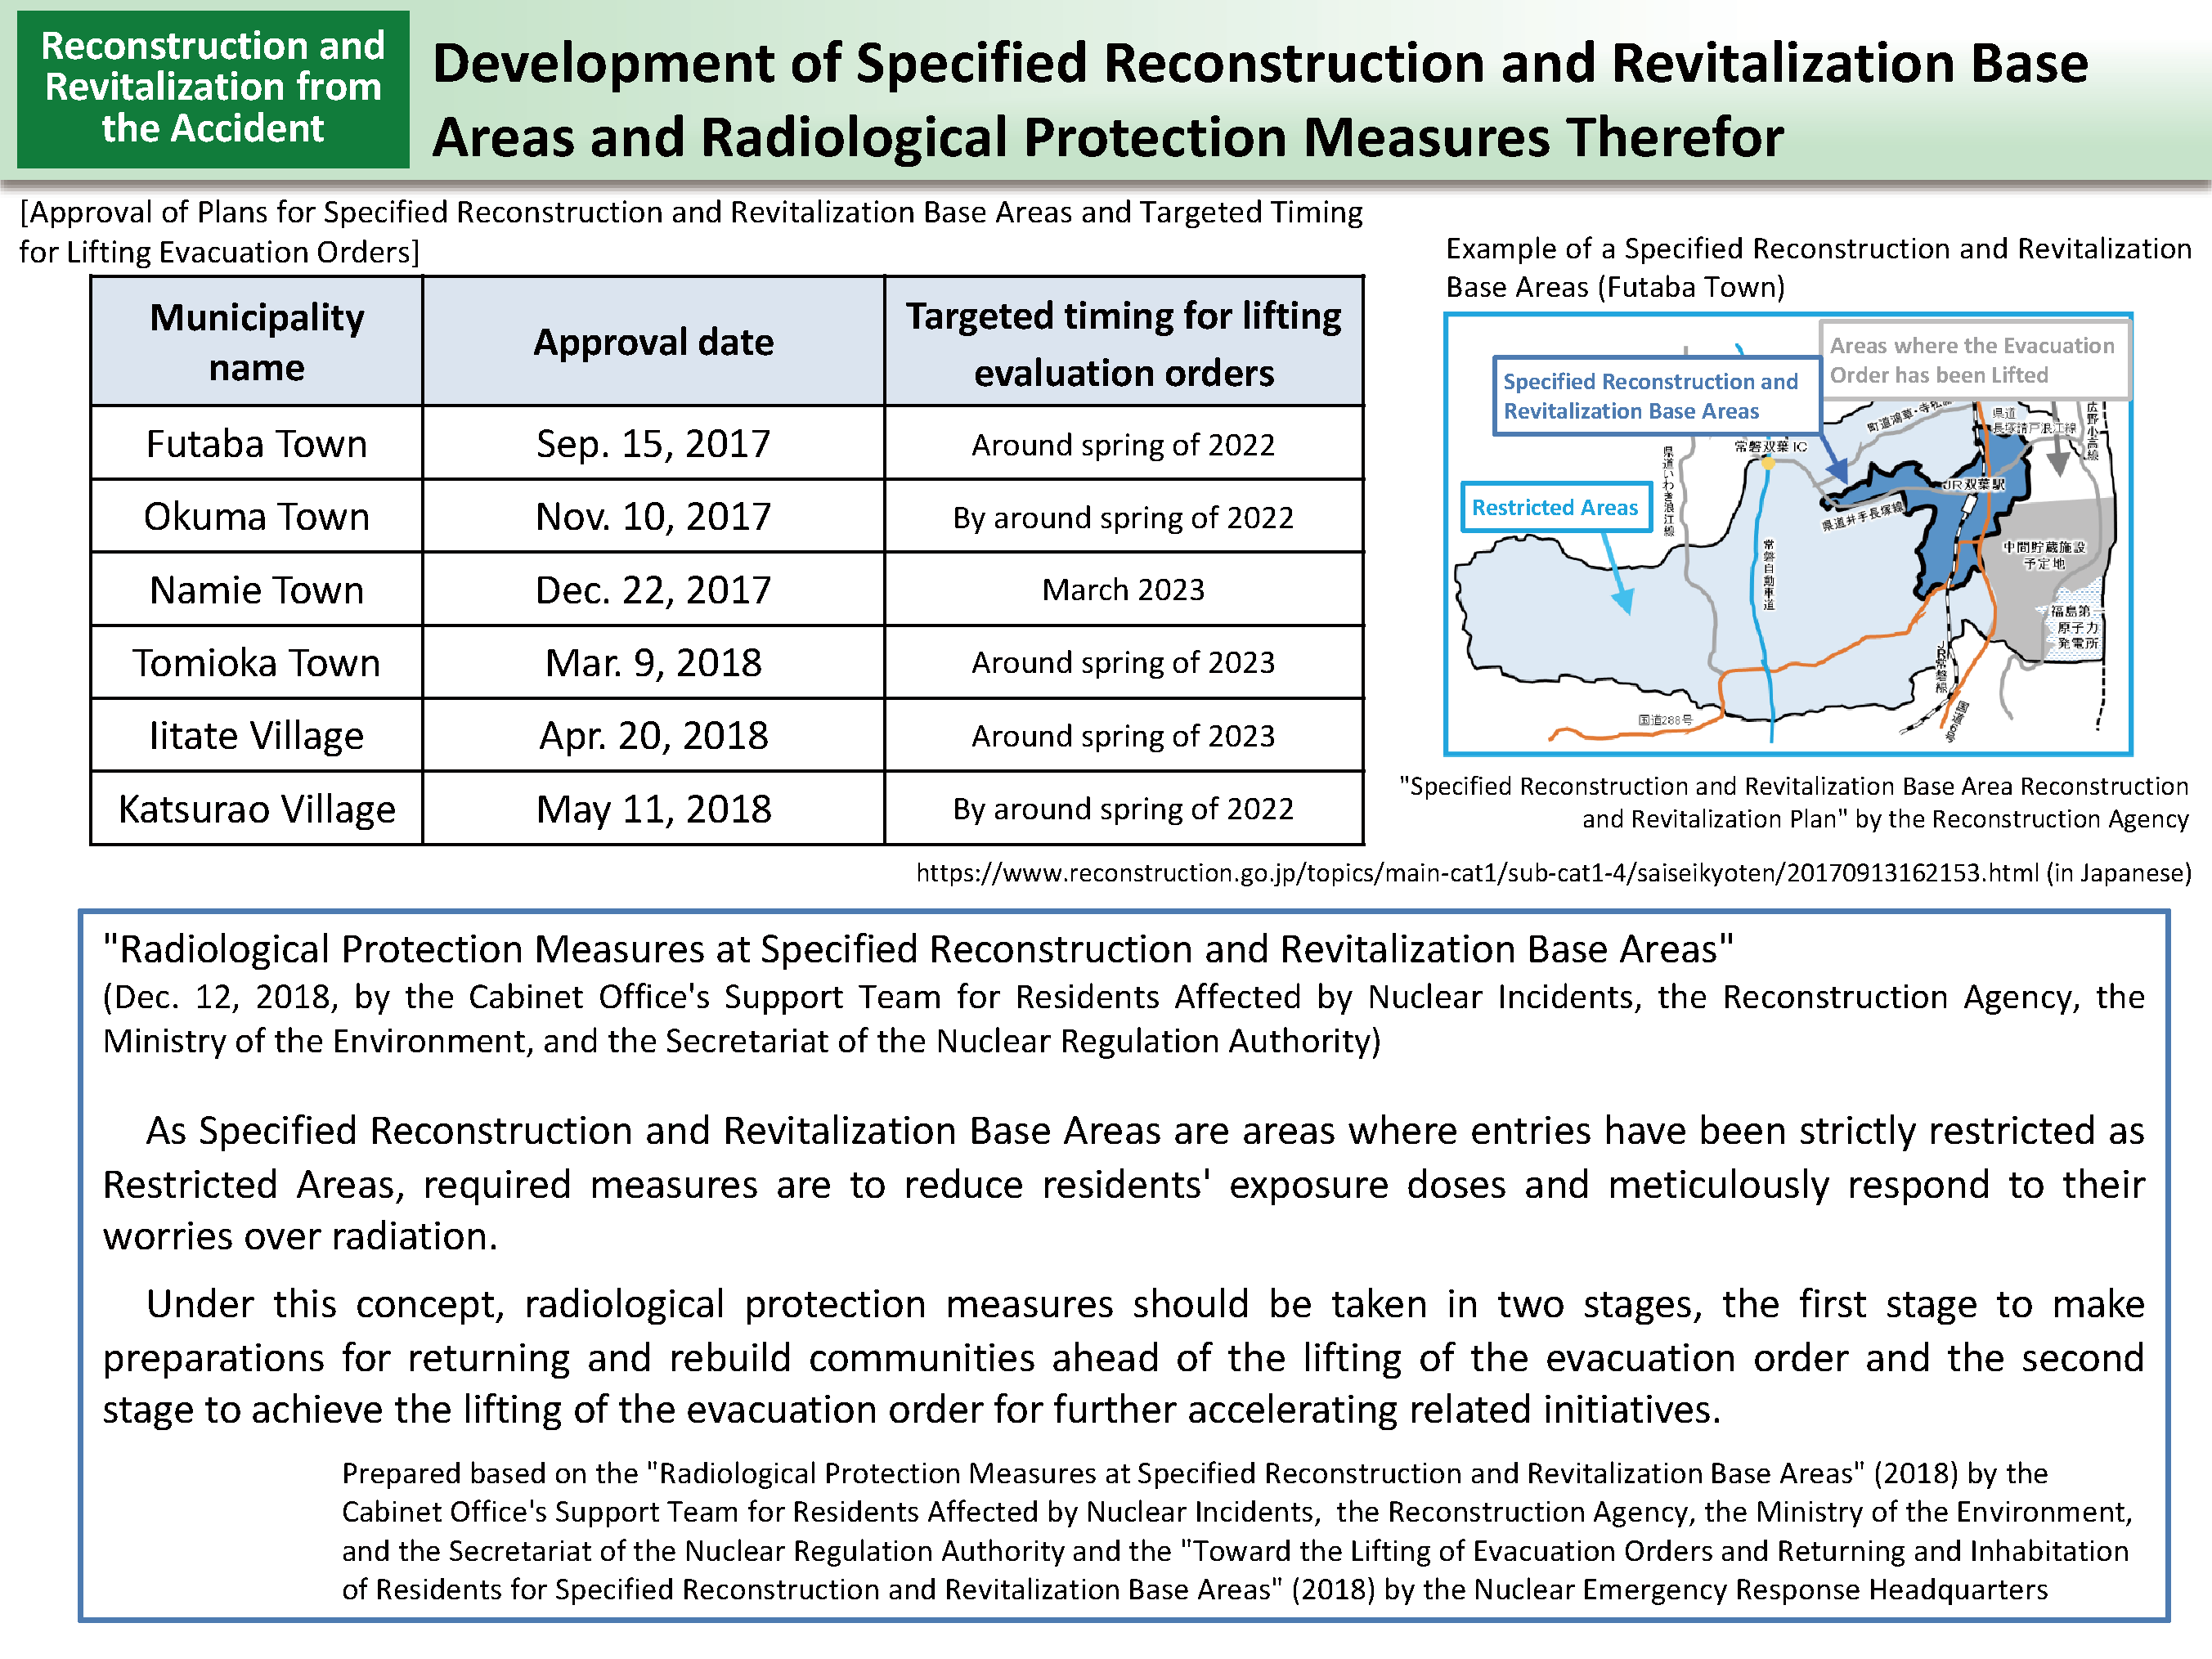 Development of Specified Reconstruction and Revitalization Base Areas and Radiological Protection Measures Therefor